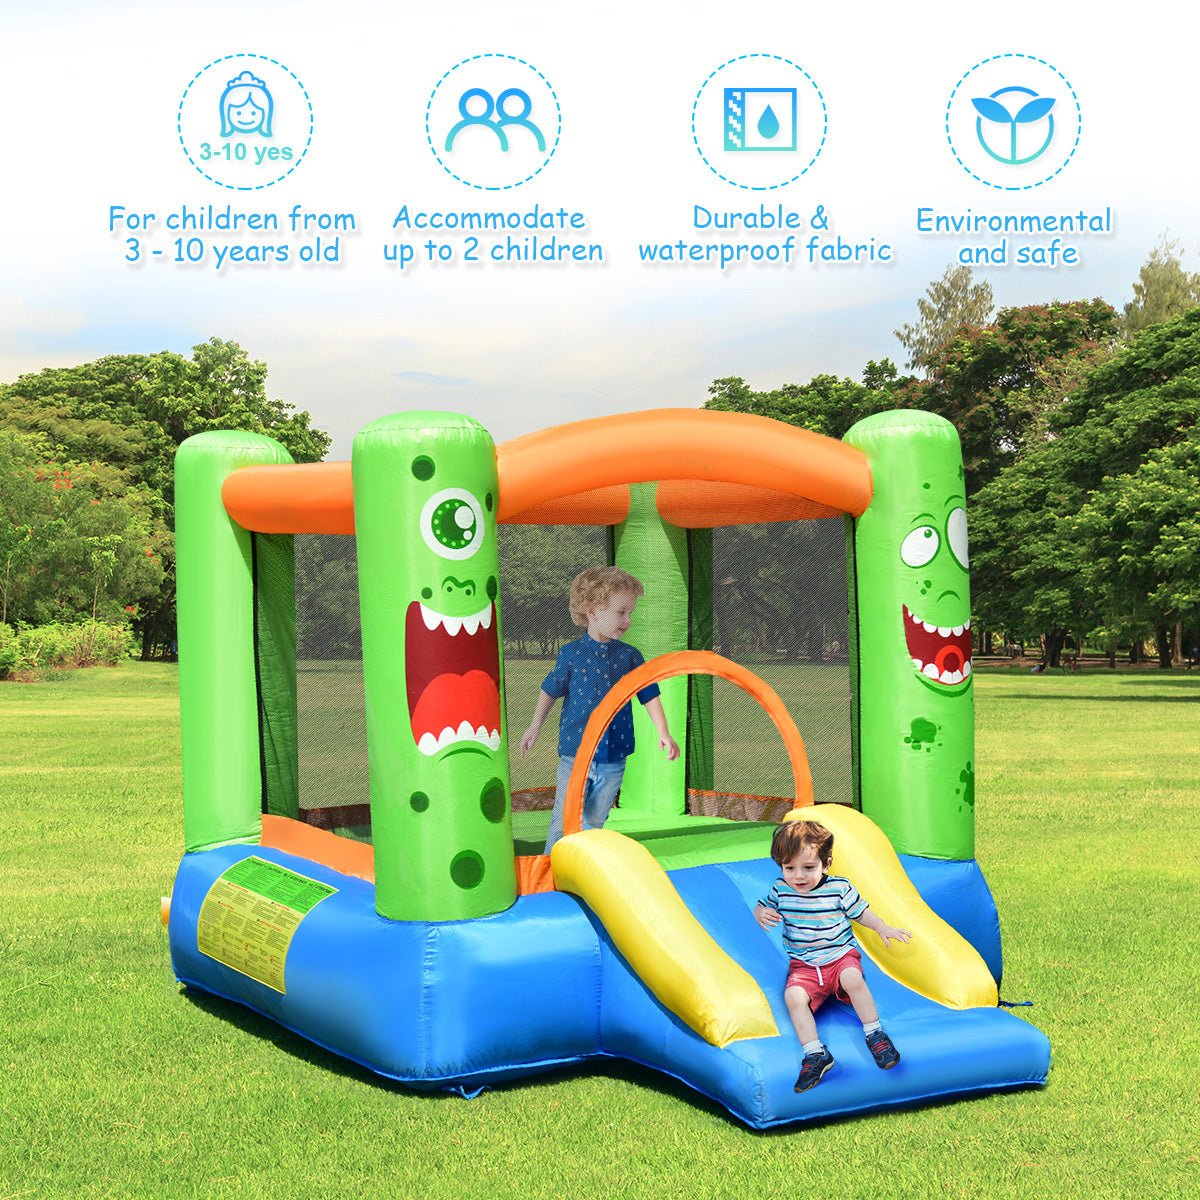 Playtime Excitement: Inflatable Bounce House with Basketball & Slide for Kids